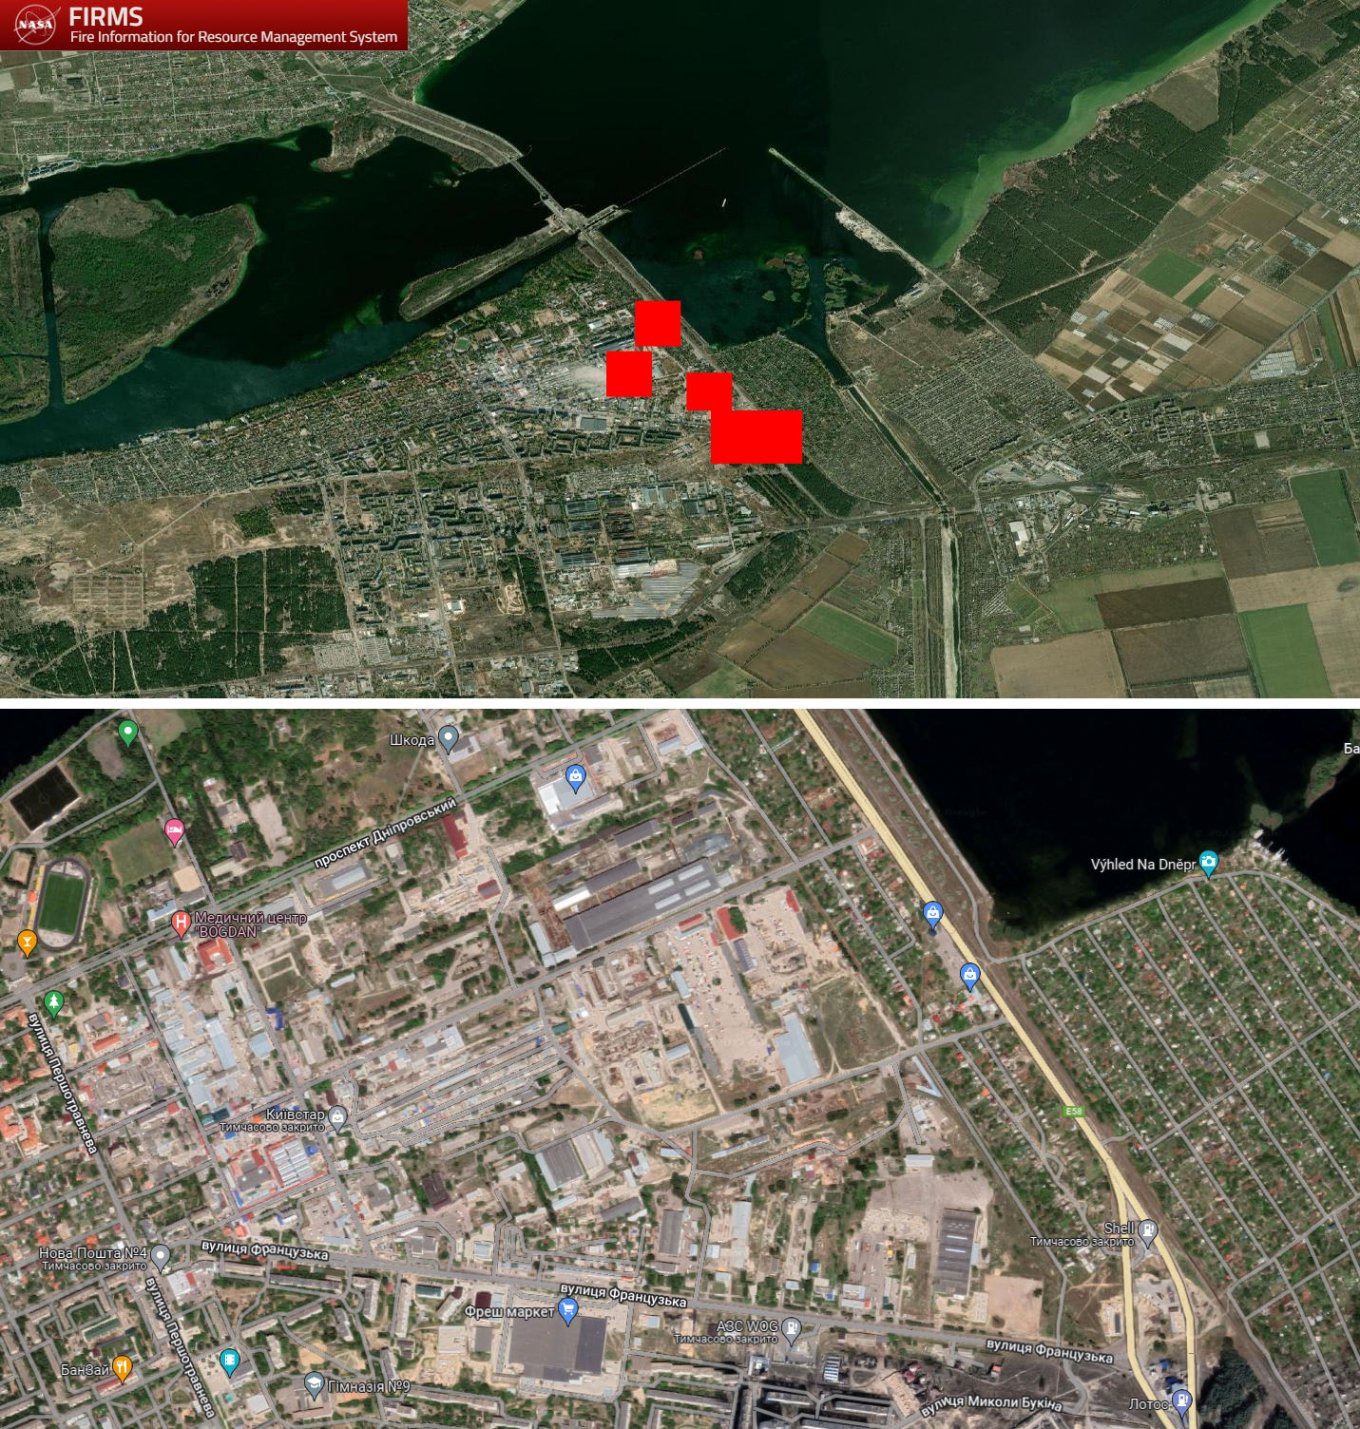 Ammo Warehouse Strike in Nova Kakhovka: Why russians Kept Ammunition In the City And What Could Possibly Explode, Defense Express, war in Ukraine, Russian-Ukrainian war